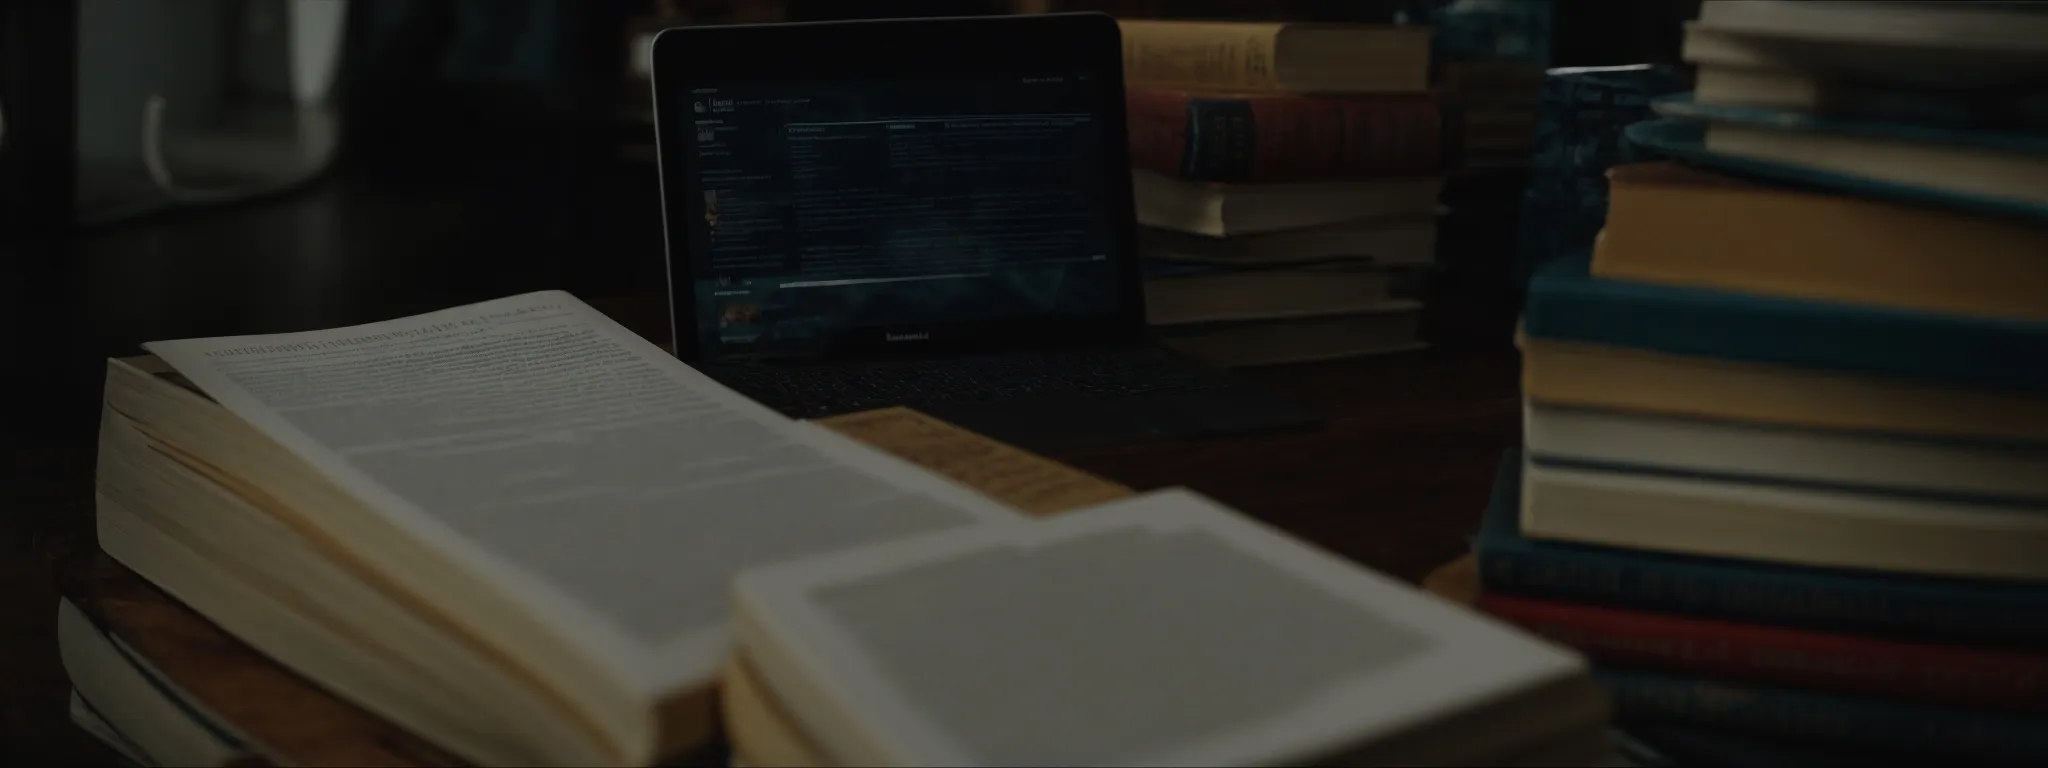 a stack of books beside a laptop displaying a book listing interface.